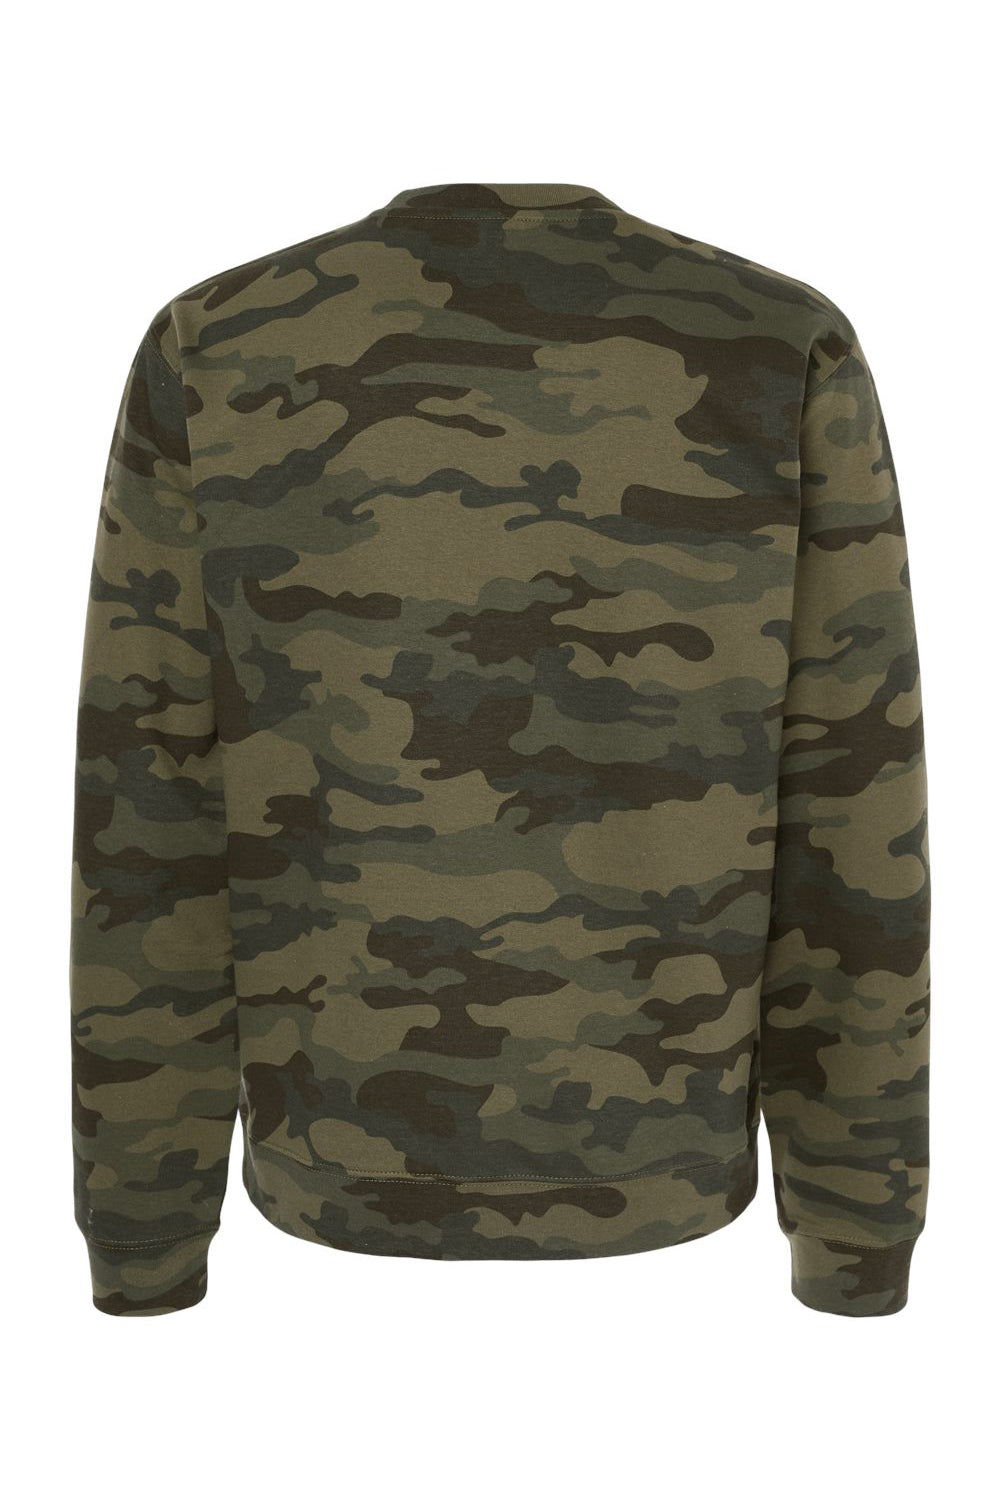 Independent Trading Co. SS3000 Mens Crewneck Sweatshirt Forest Green Camo Flat Back